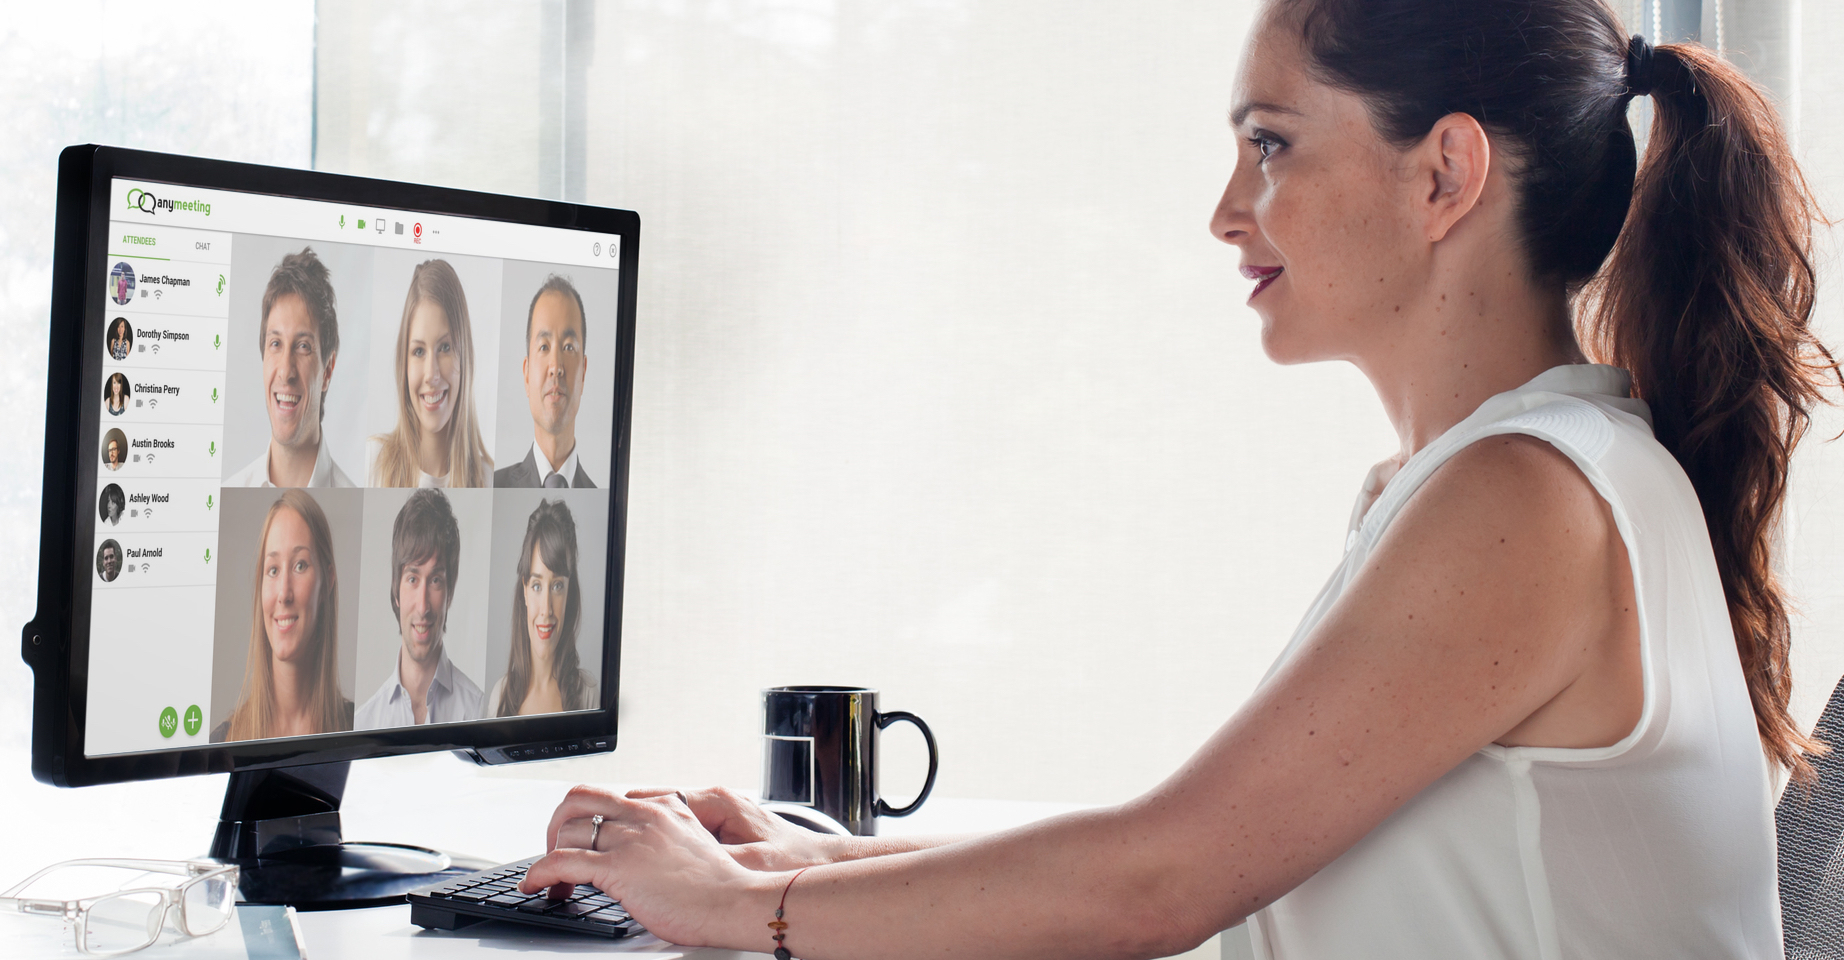 what is web conferencing? how it can be useful with VoIP